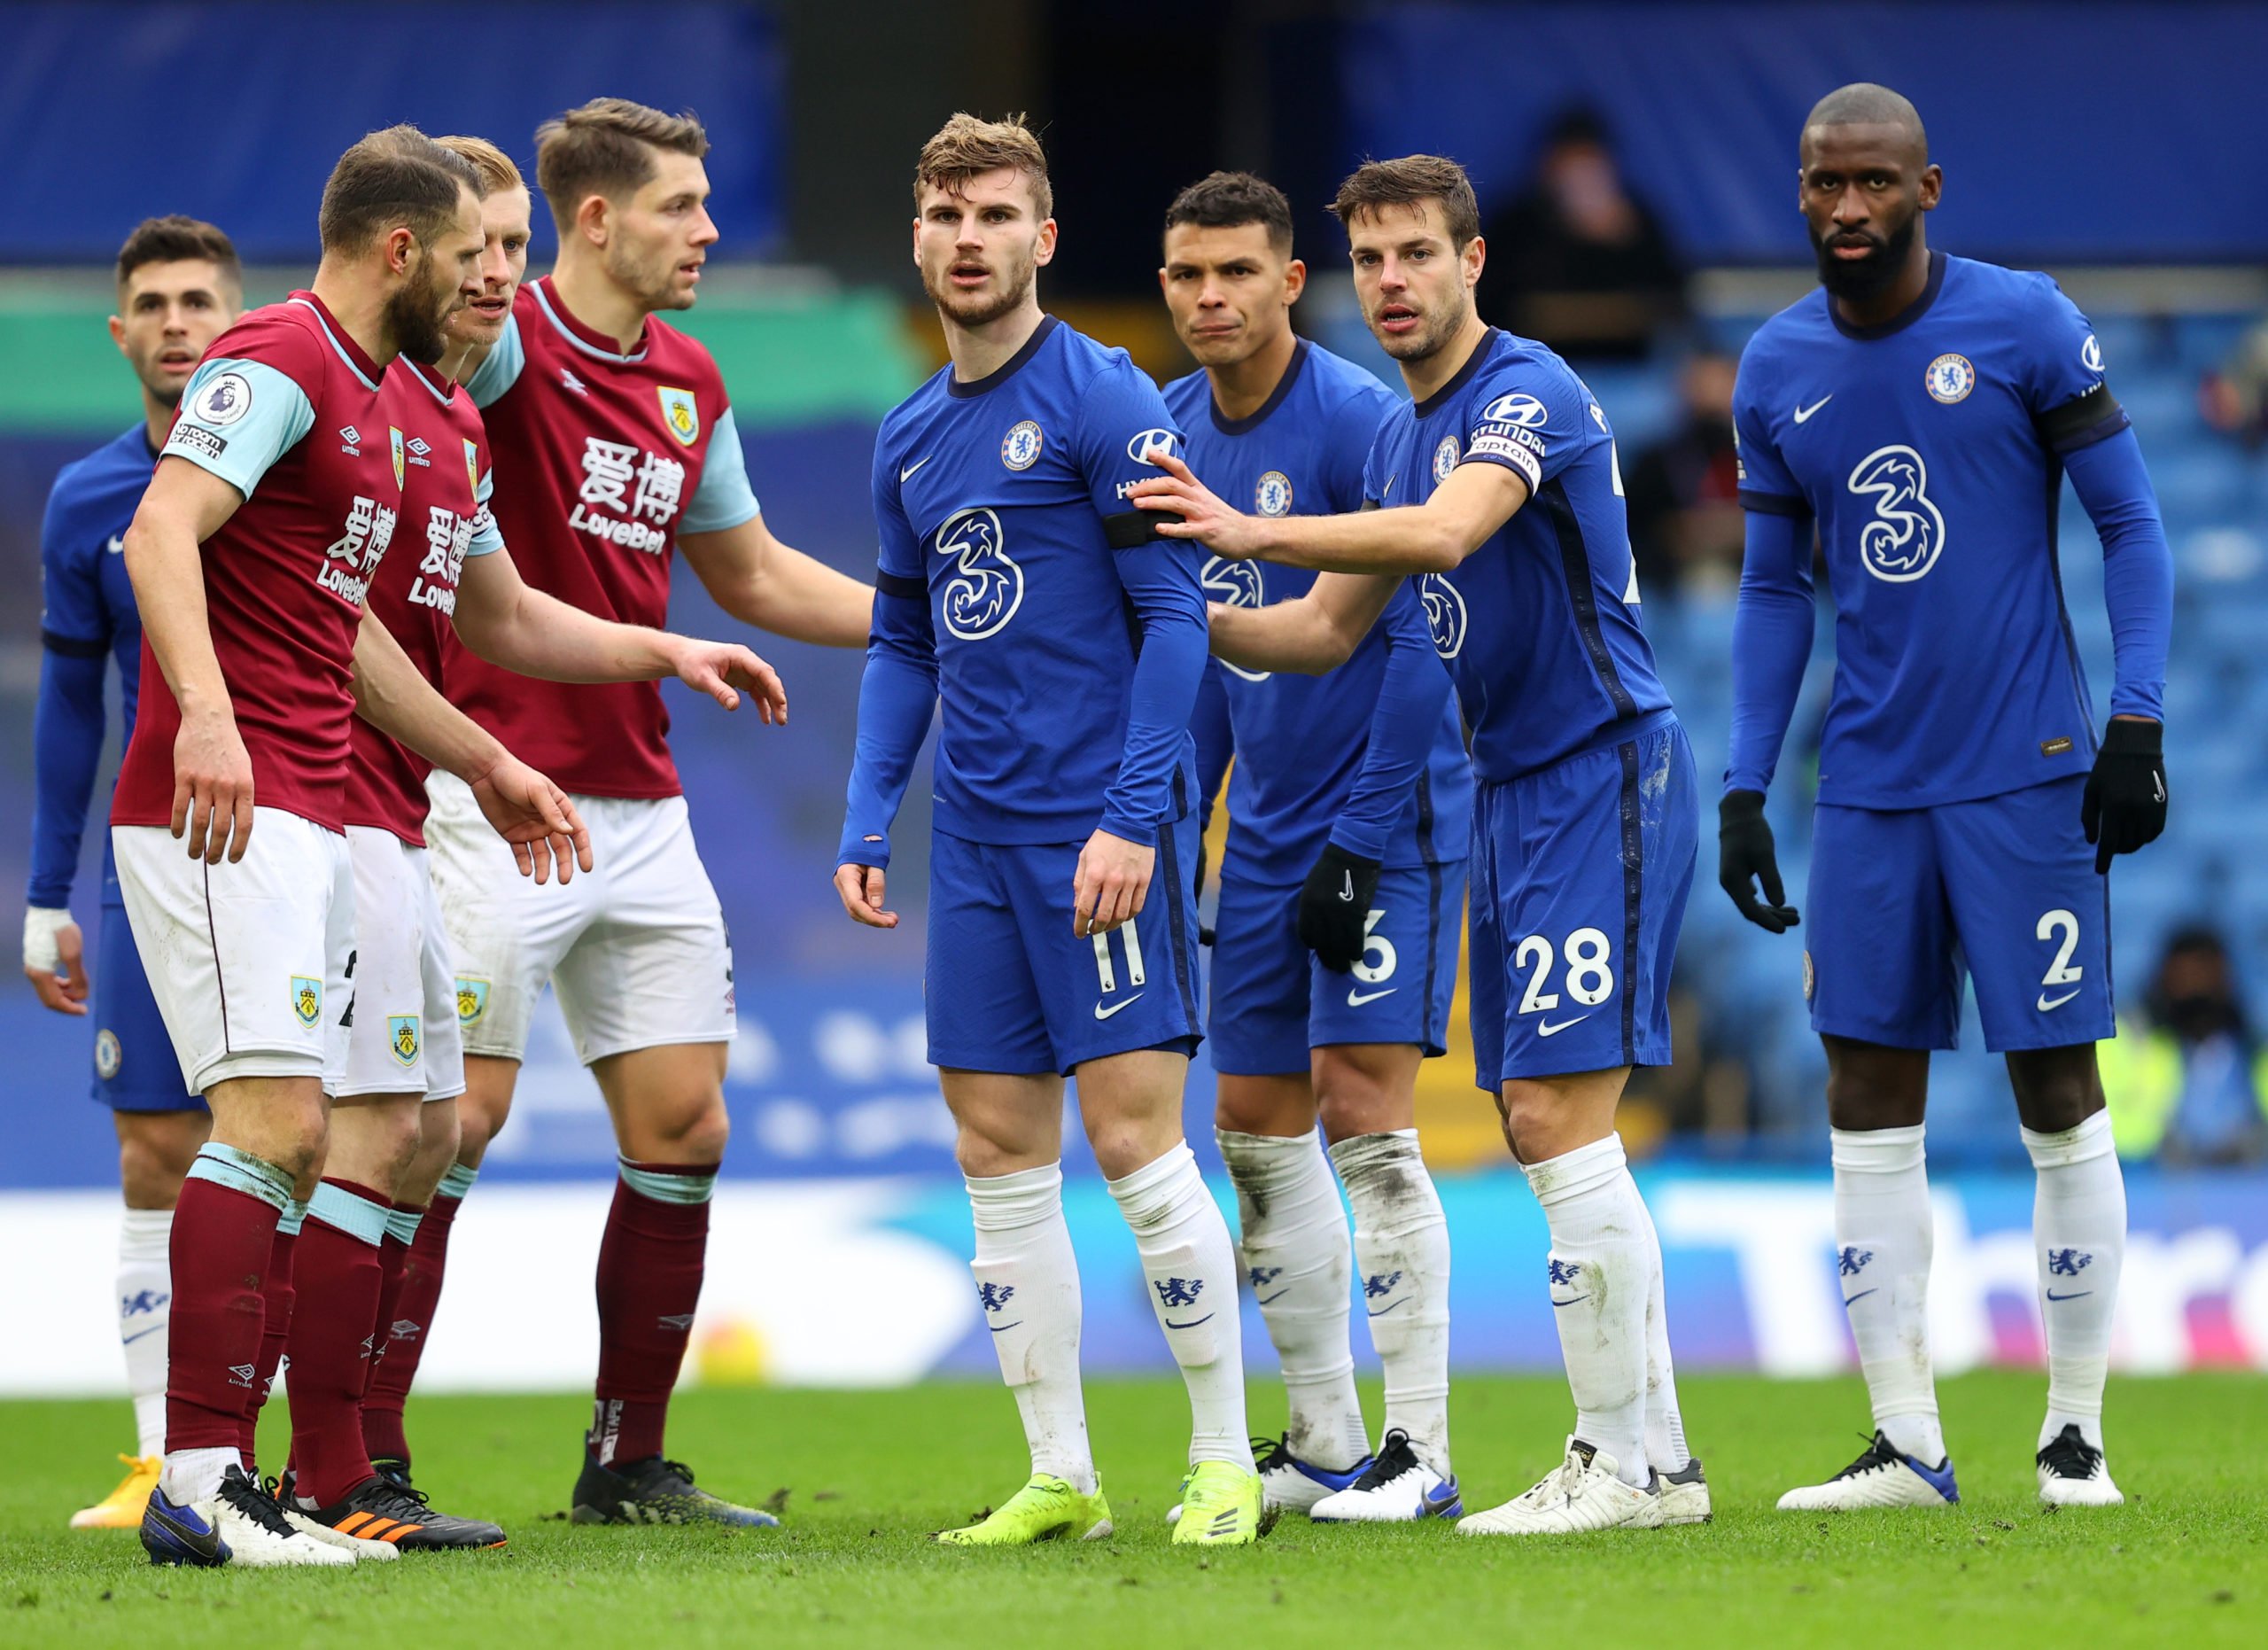 Chelsea Players Rated In Impressive Win Vs Burnley (Chelsea players are seen in the picture)